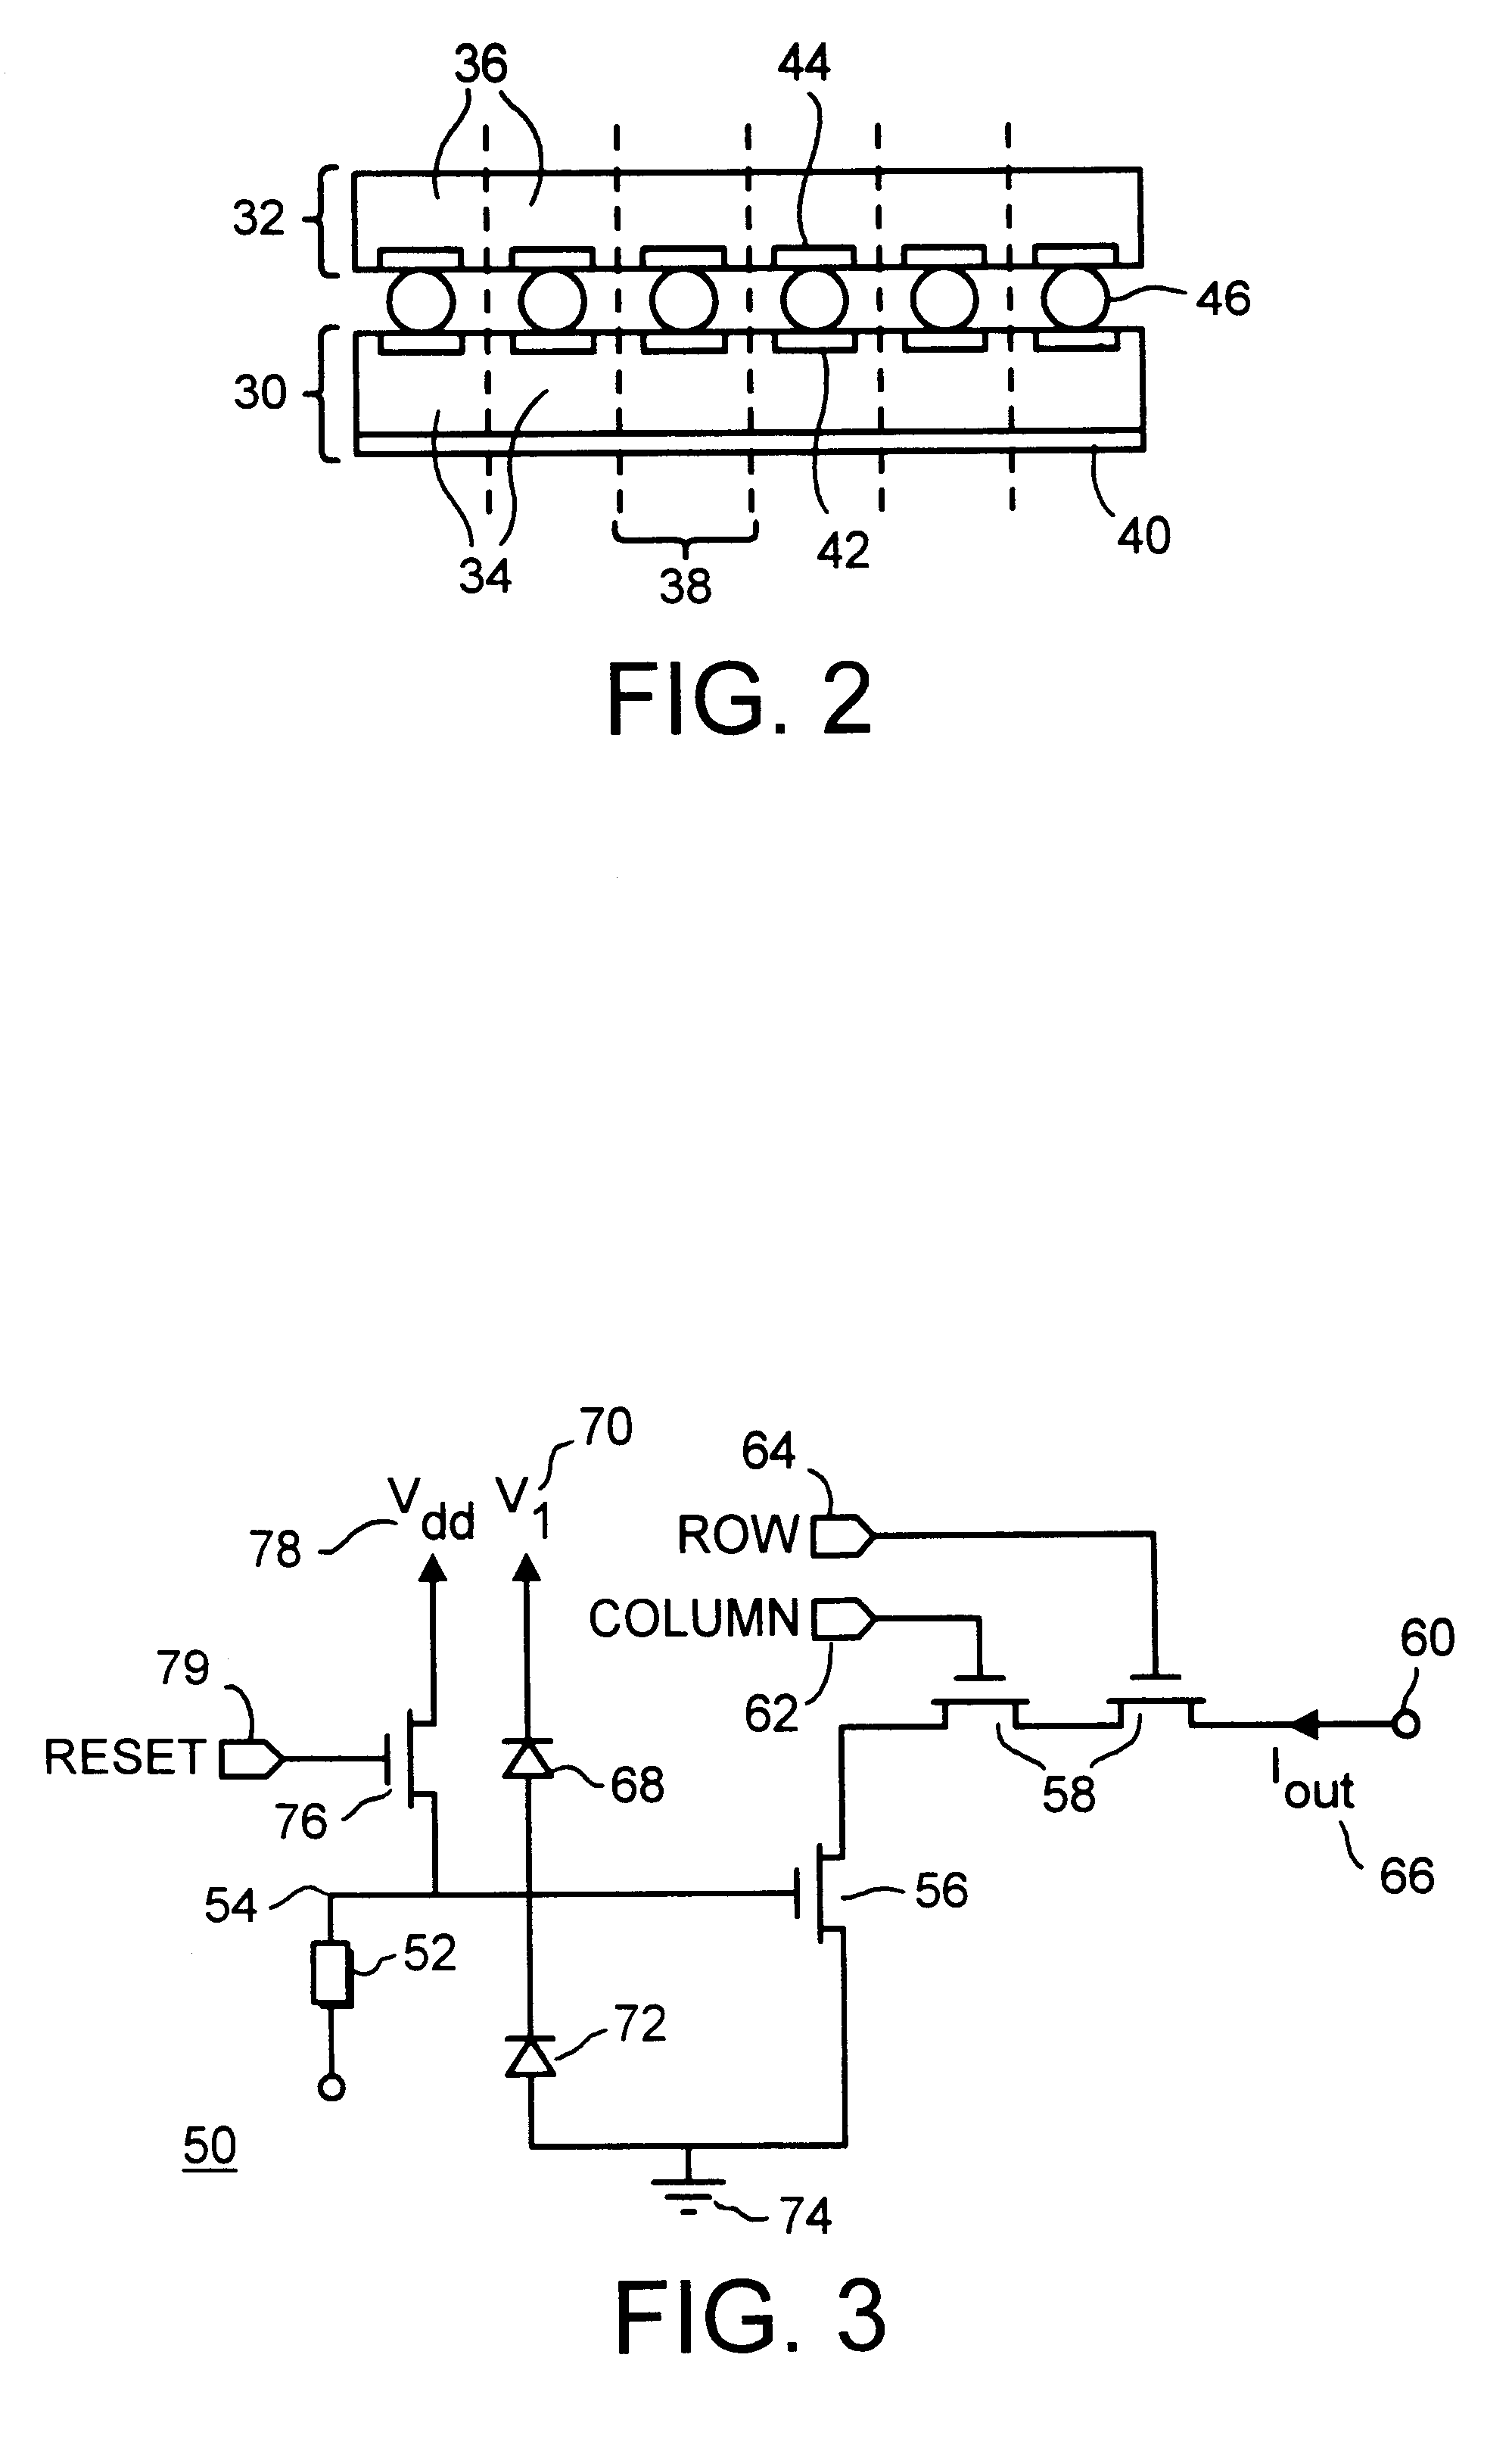 Apparatus for radiation imaging using an array of image cells